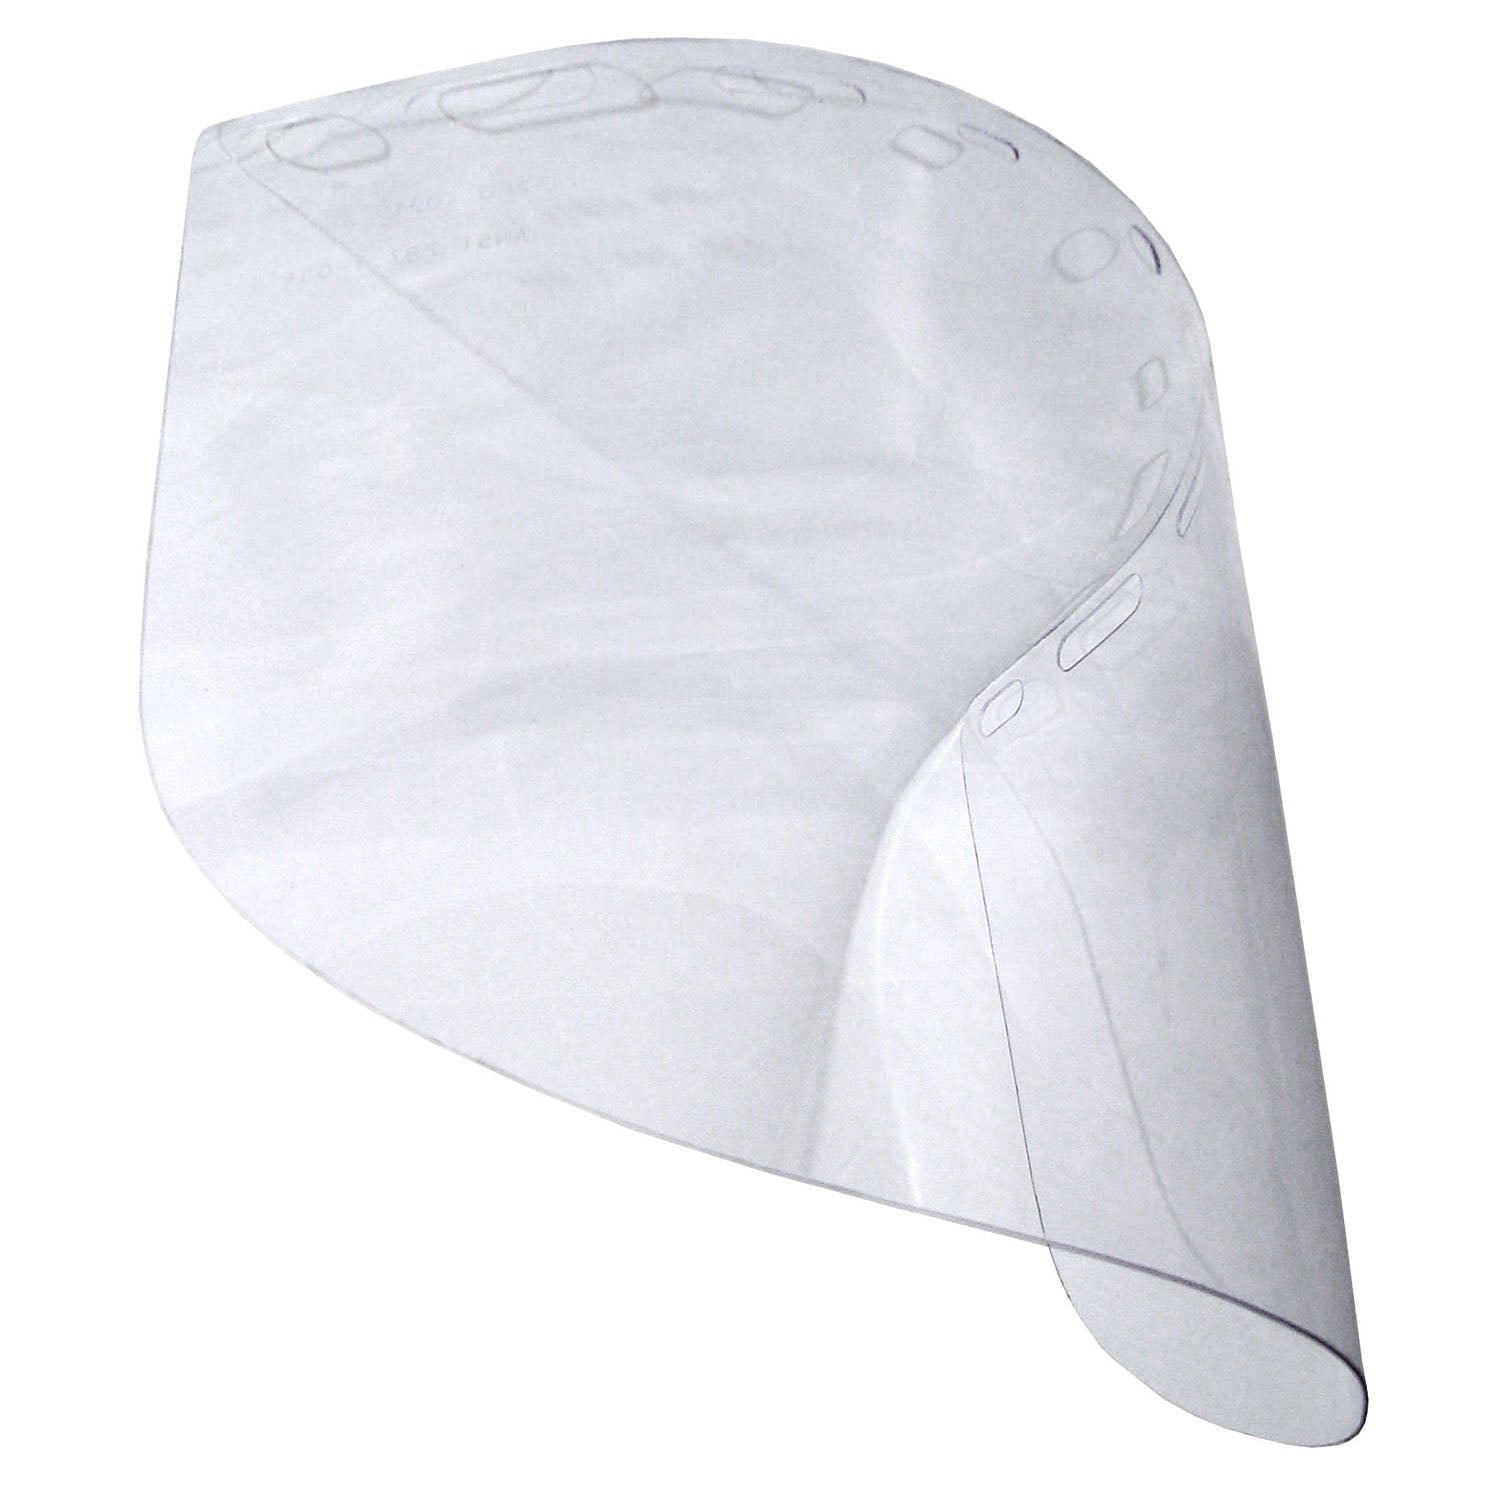 Radians Clear PC Face Shield - .040 x 8 x 15 1/2 Clear PC